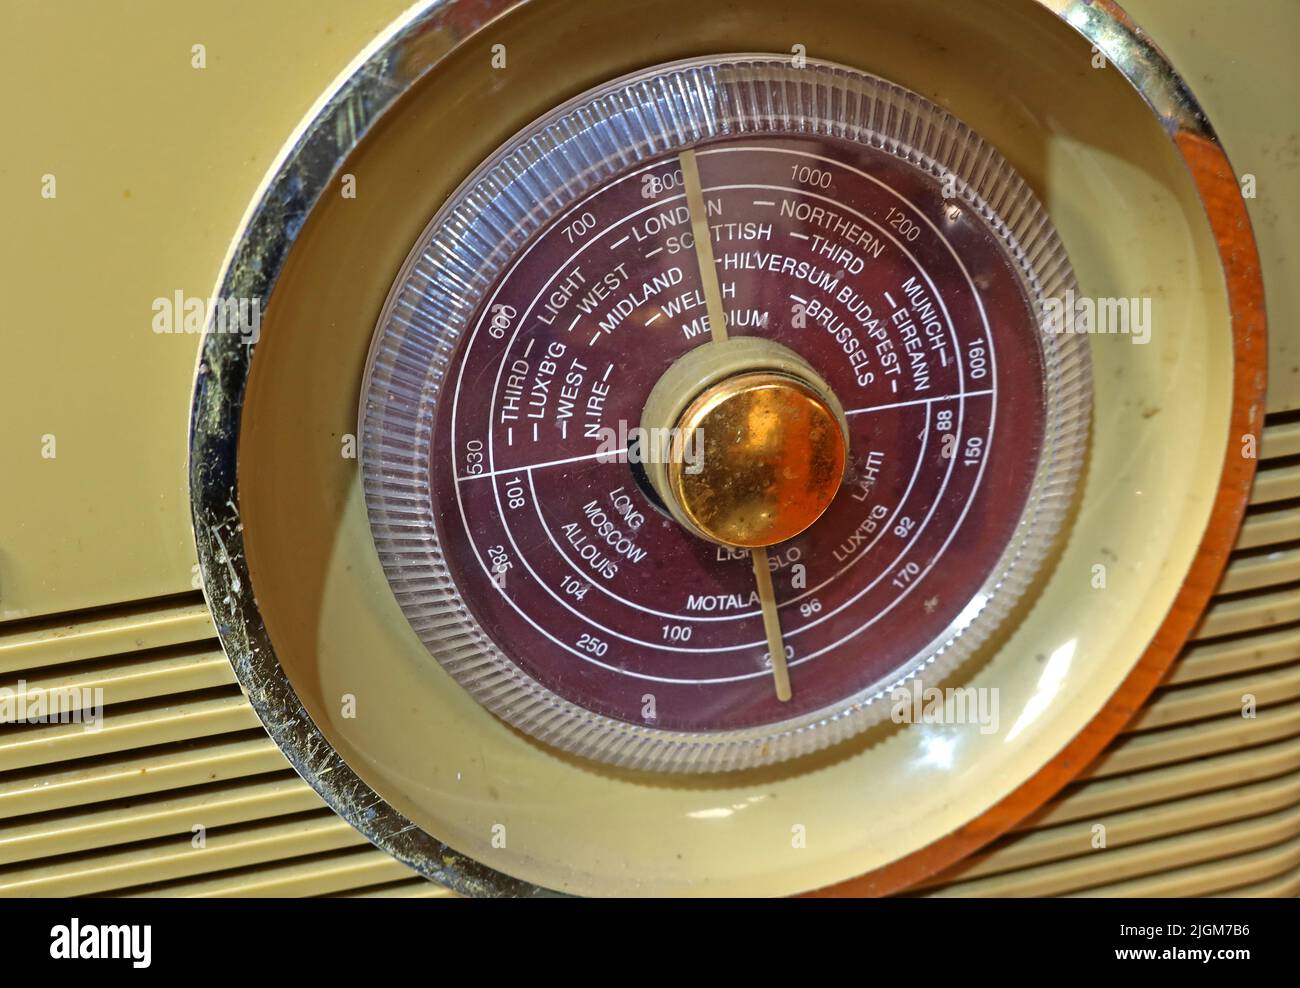 Bush brand , old fashioned classic circular radio dial, Long, Medium wave, Moscow, Brussels, Munich, Third, Light, London, Midland, Budapest frequency Stock Photo